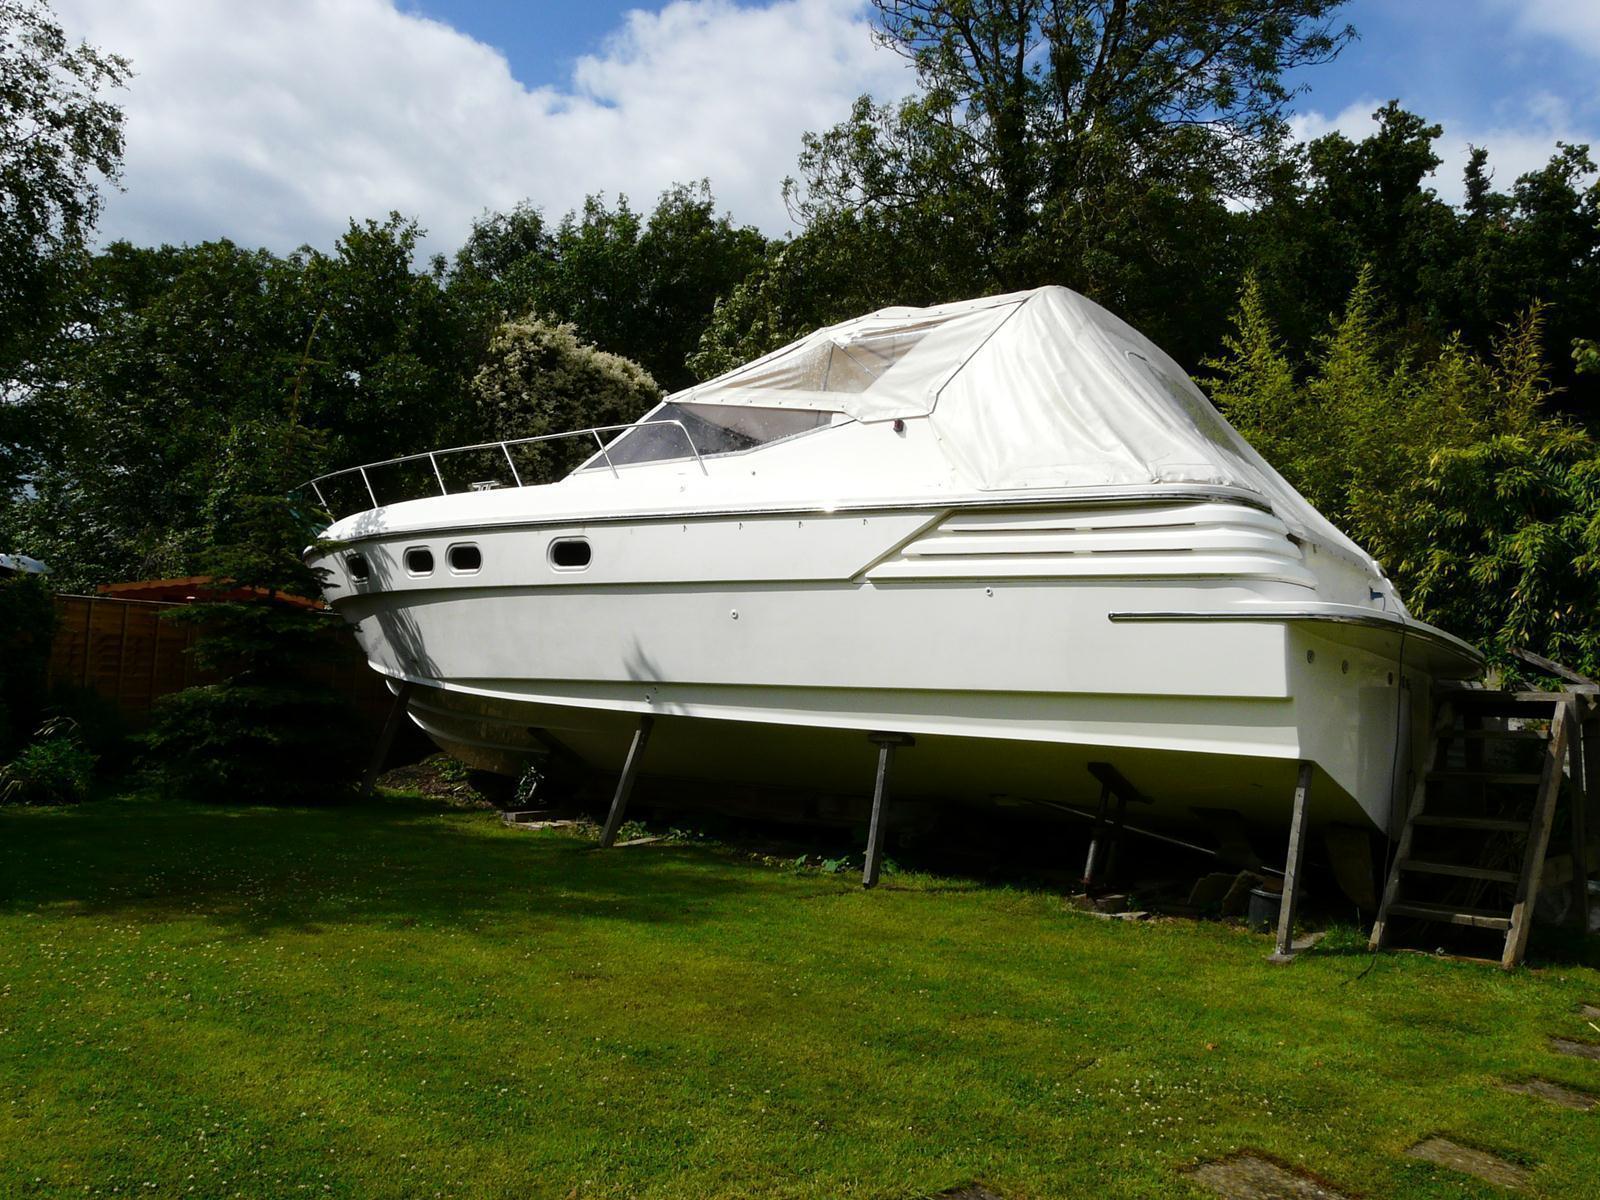 Colvic Sunquest 40, M/O Ruislip - OPEN TO OFFERS!, Greater London